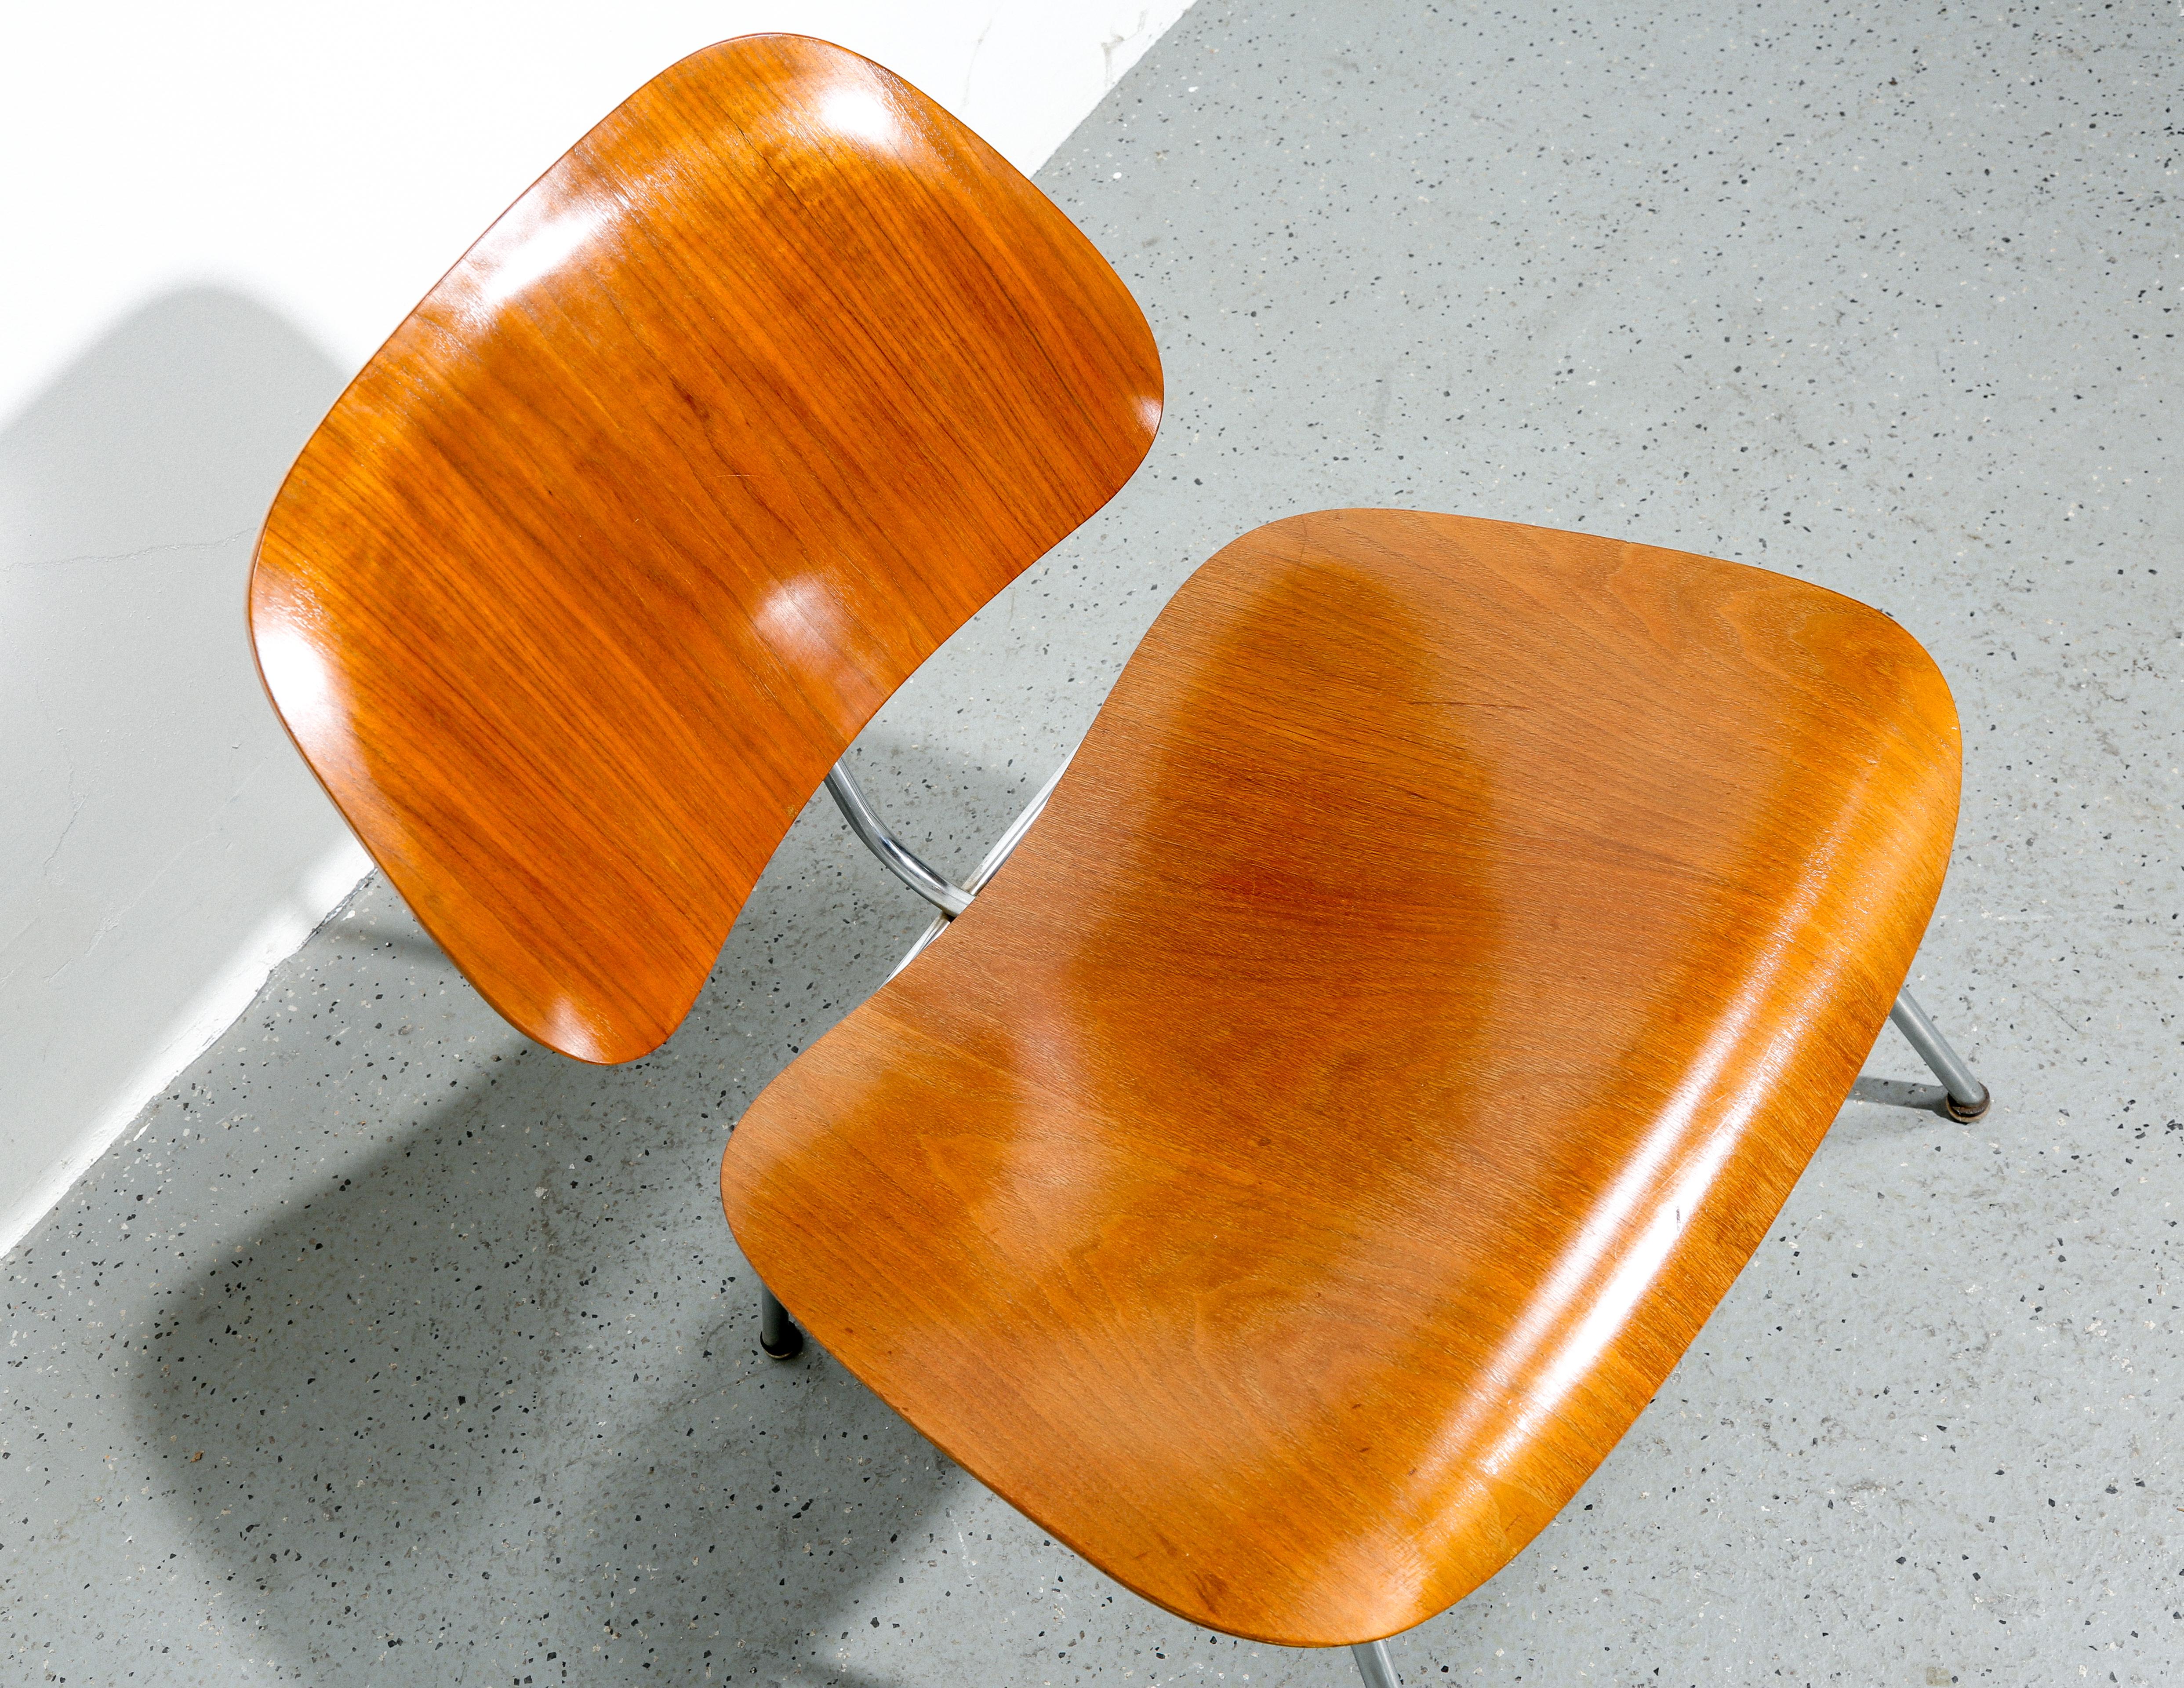 The Eames LCM (Lounge Chair Metal) is a celebrated example of mid-century modern design by Charles and Ray Eames. First introduced in 1945, this chair embodies simplicity, functionality, and comfort.

Crafted with molded plywood and a metal base,